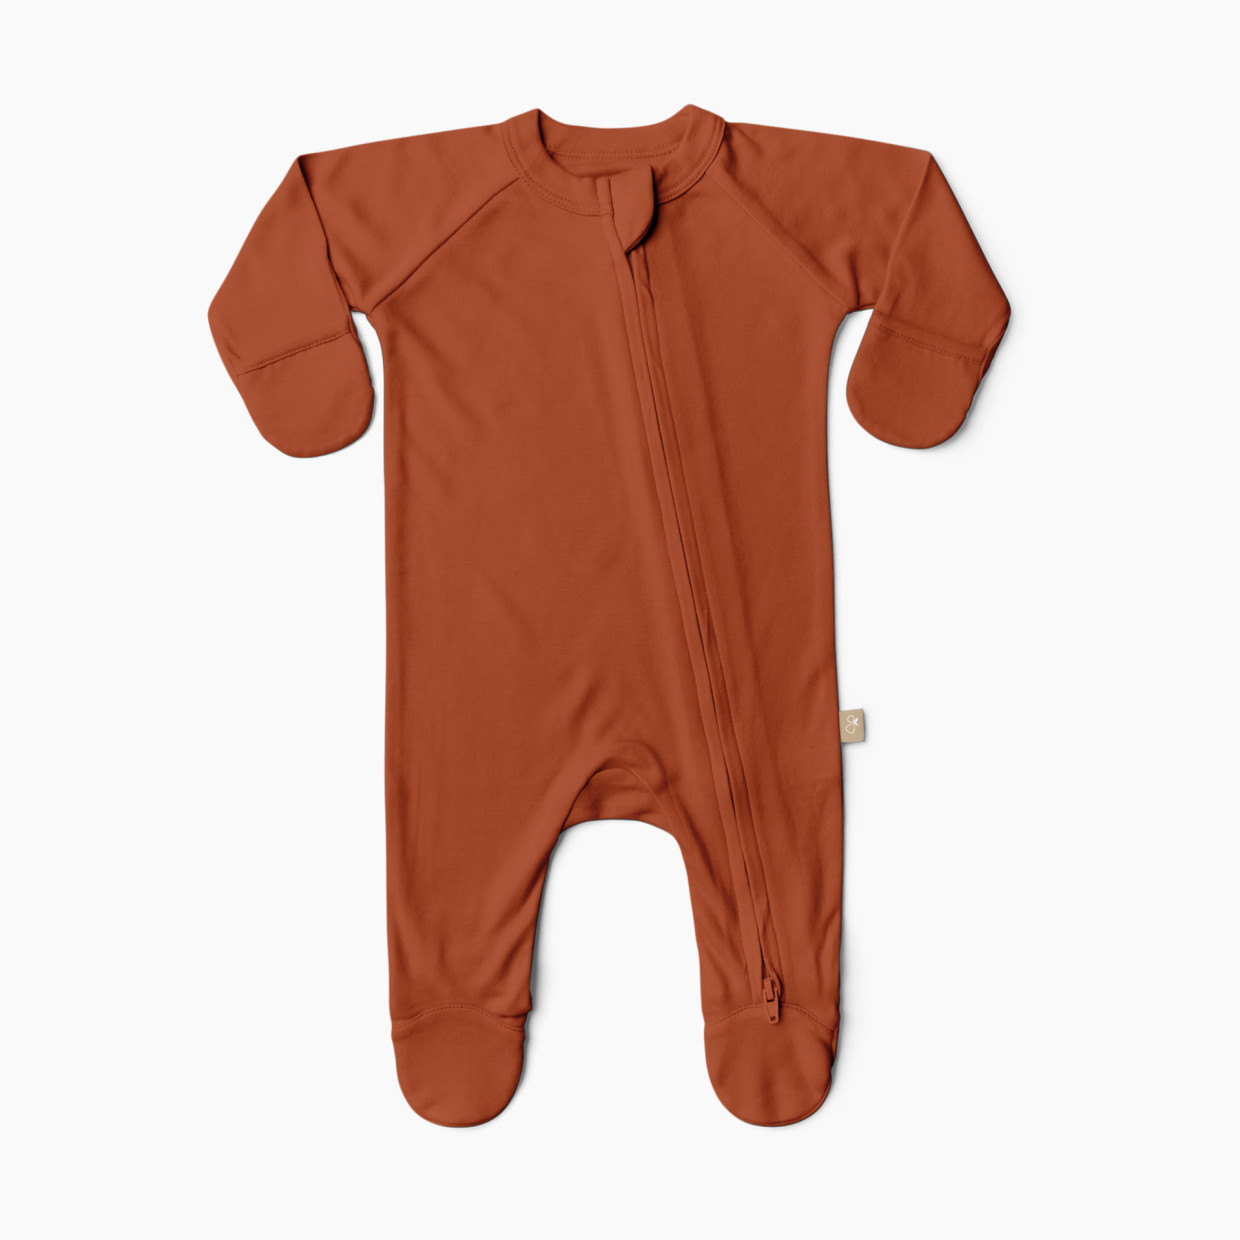 Goumi Kids x Babylist Grow With You Footie - Loose Fit - Clay, 0-3 M.